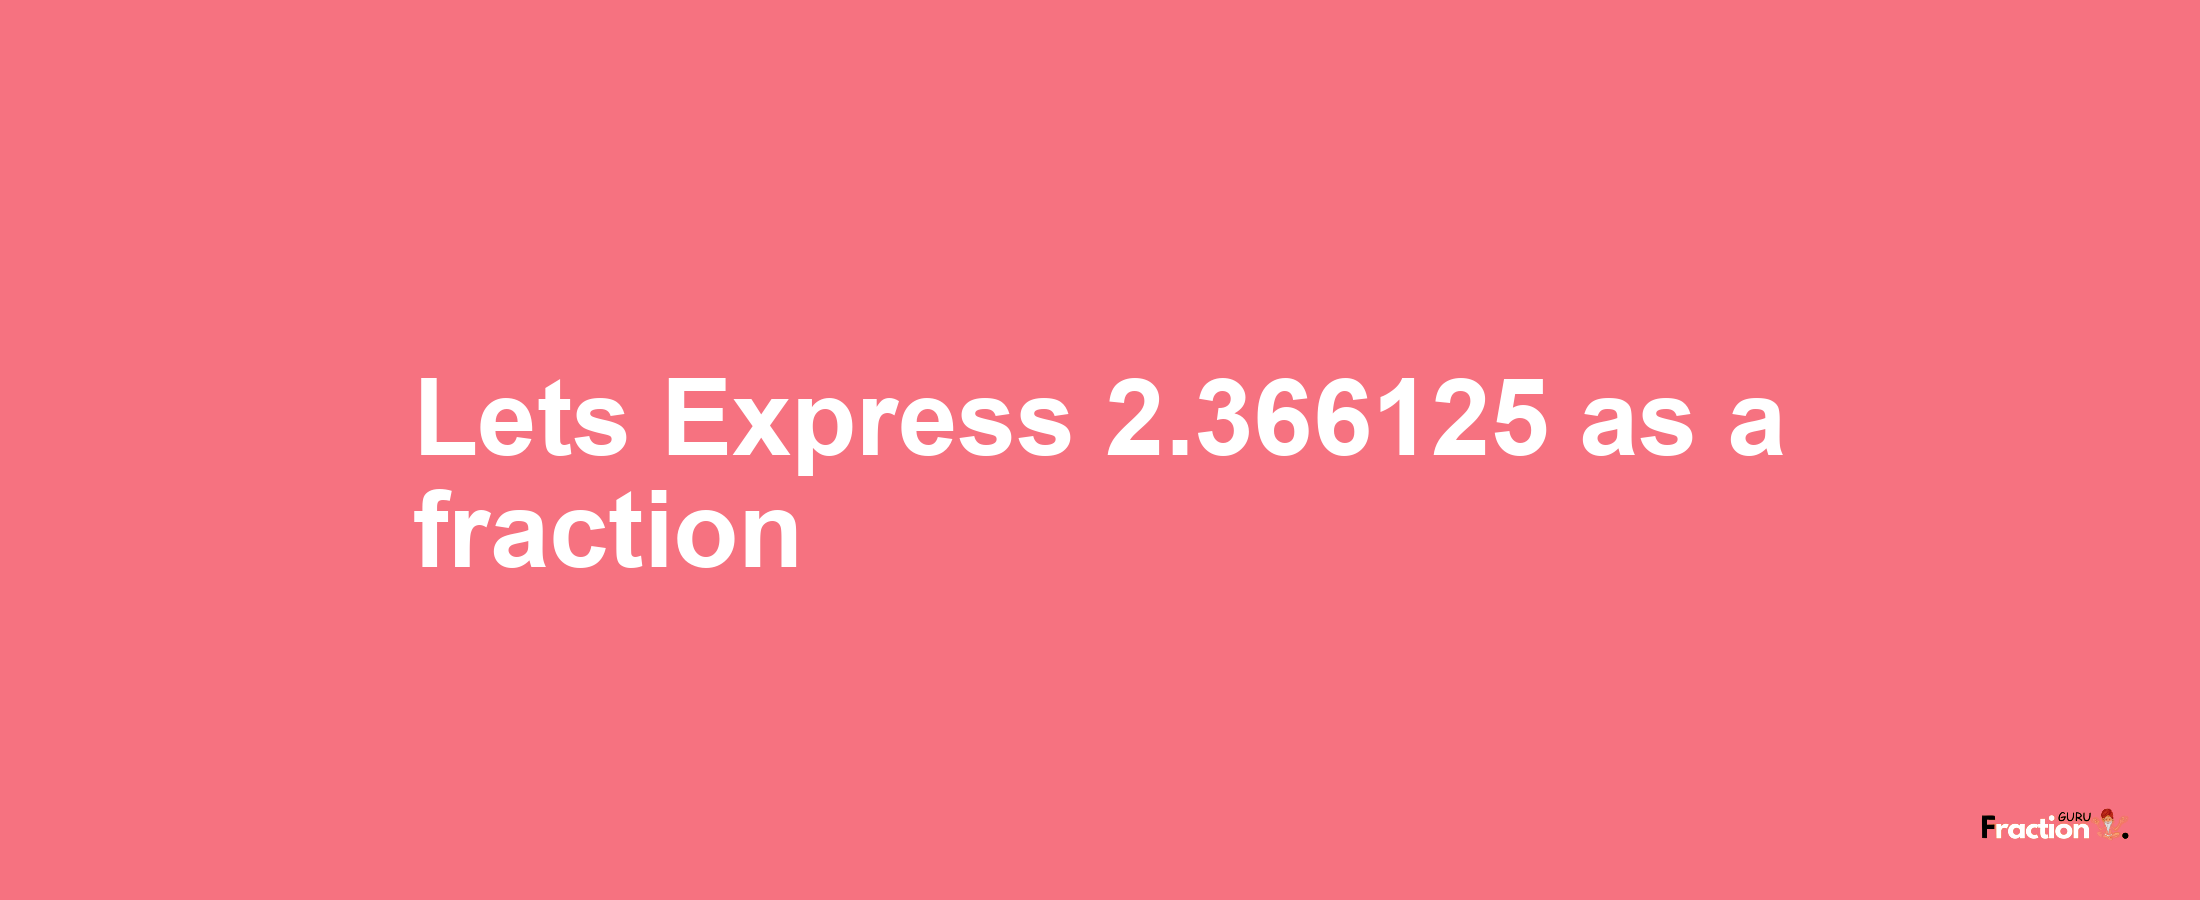 Lets Express 2.366125 as afraction